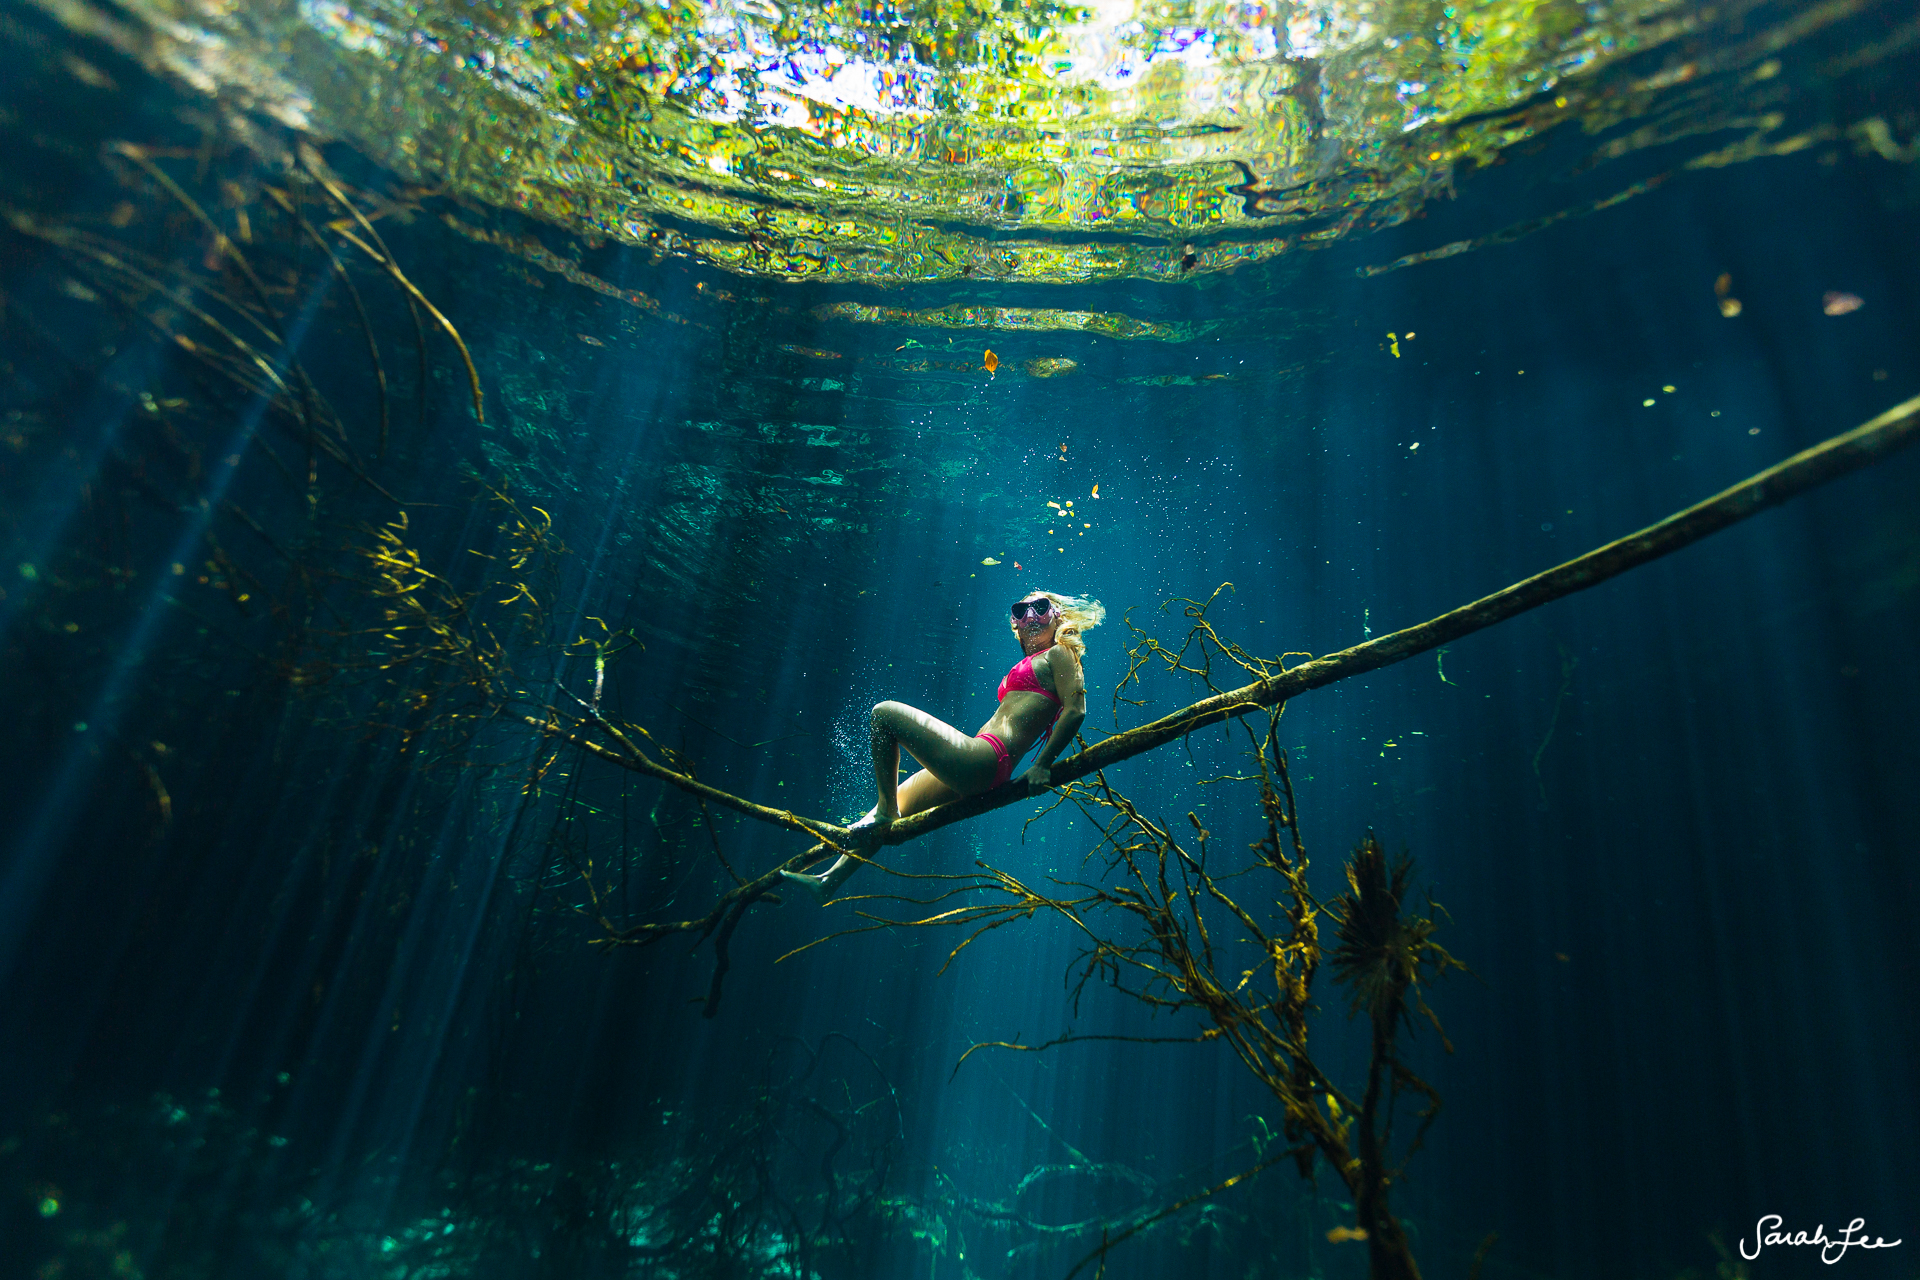  Exploring an untouched cenote with Alison Teal and cave explorer Sam Meacham. Photo taken with a Canon 5D MKIII + 8-15 fisheye lens in an Outex Water Housing and dome port. 